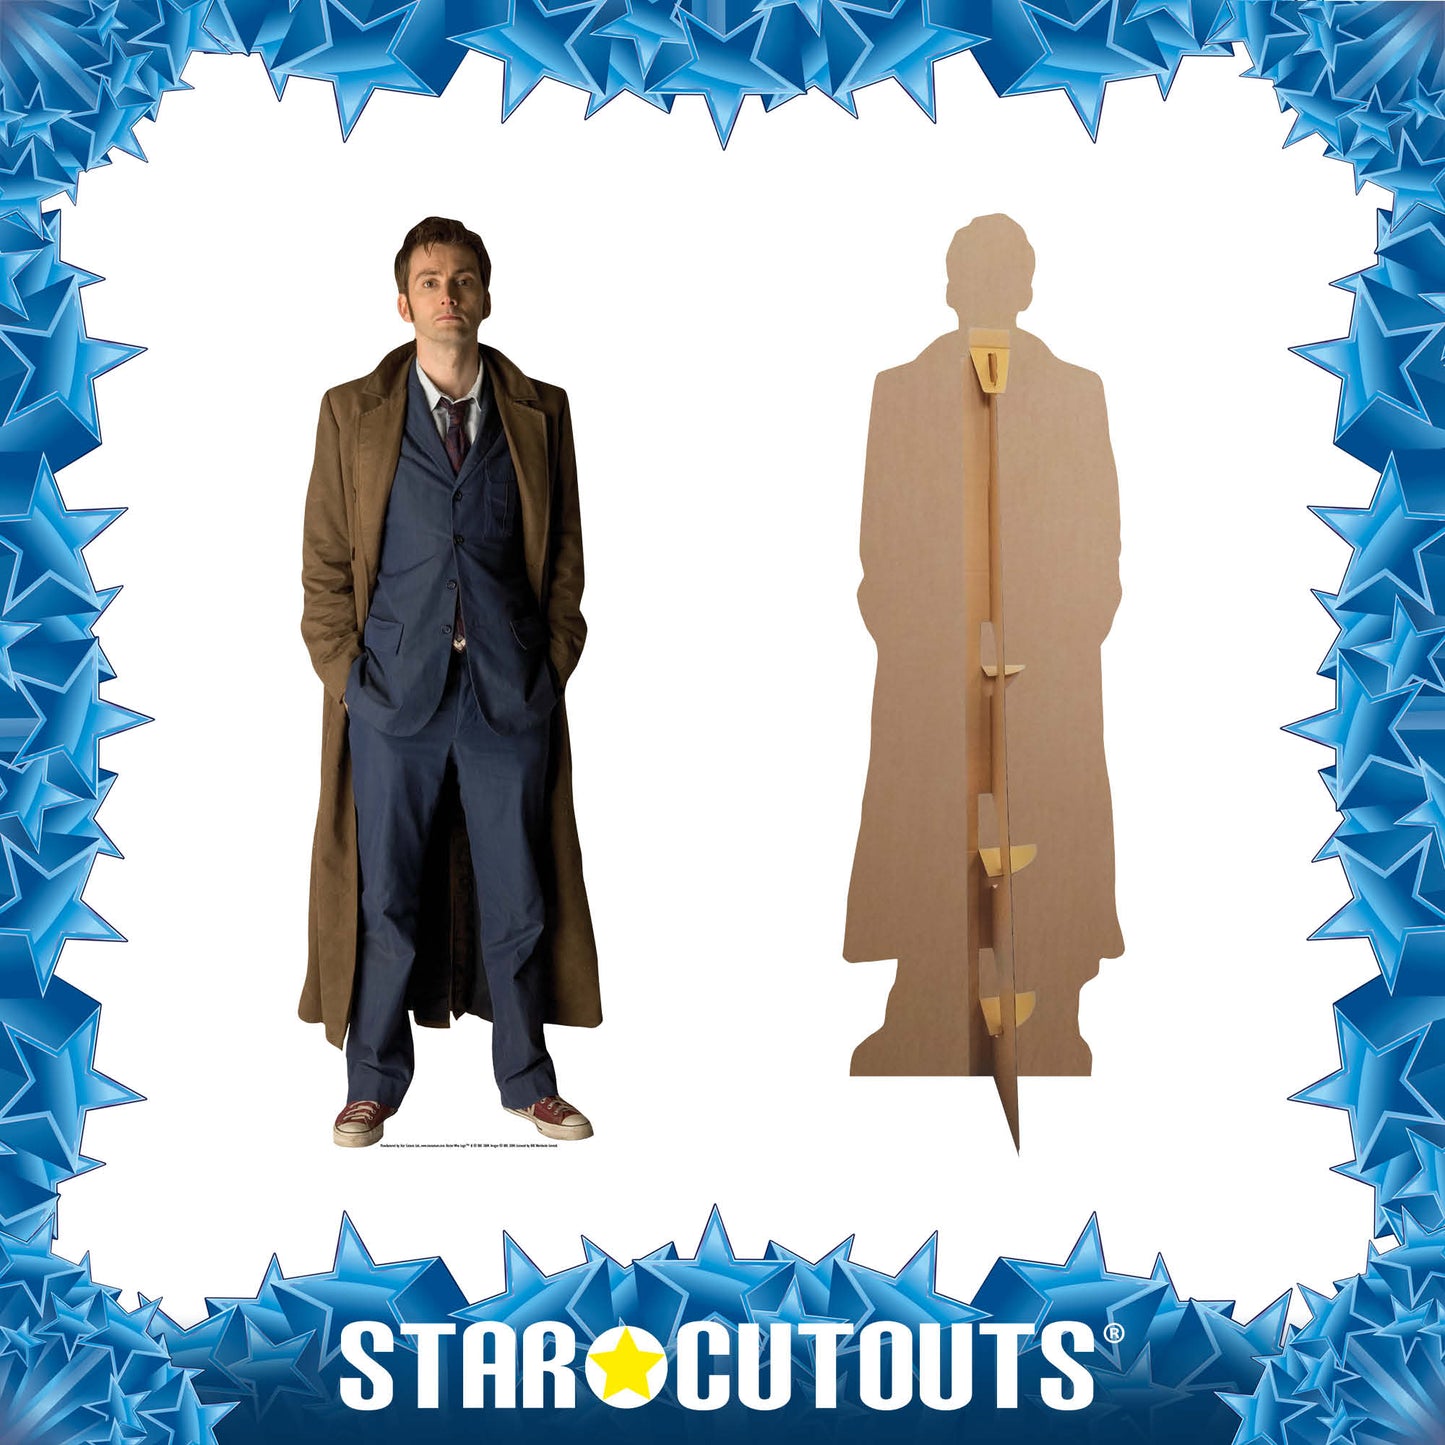 The Doctor David Tenant Cardboard Cut Out Height 183cm - Star Cutouts